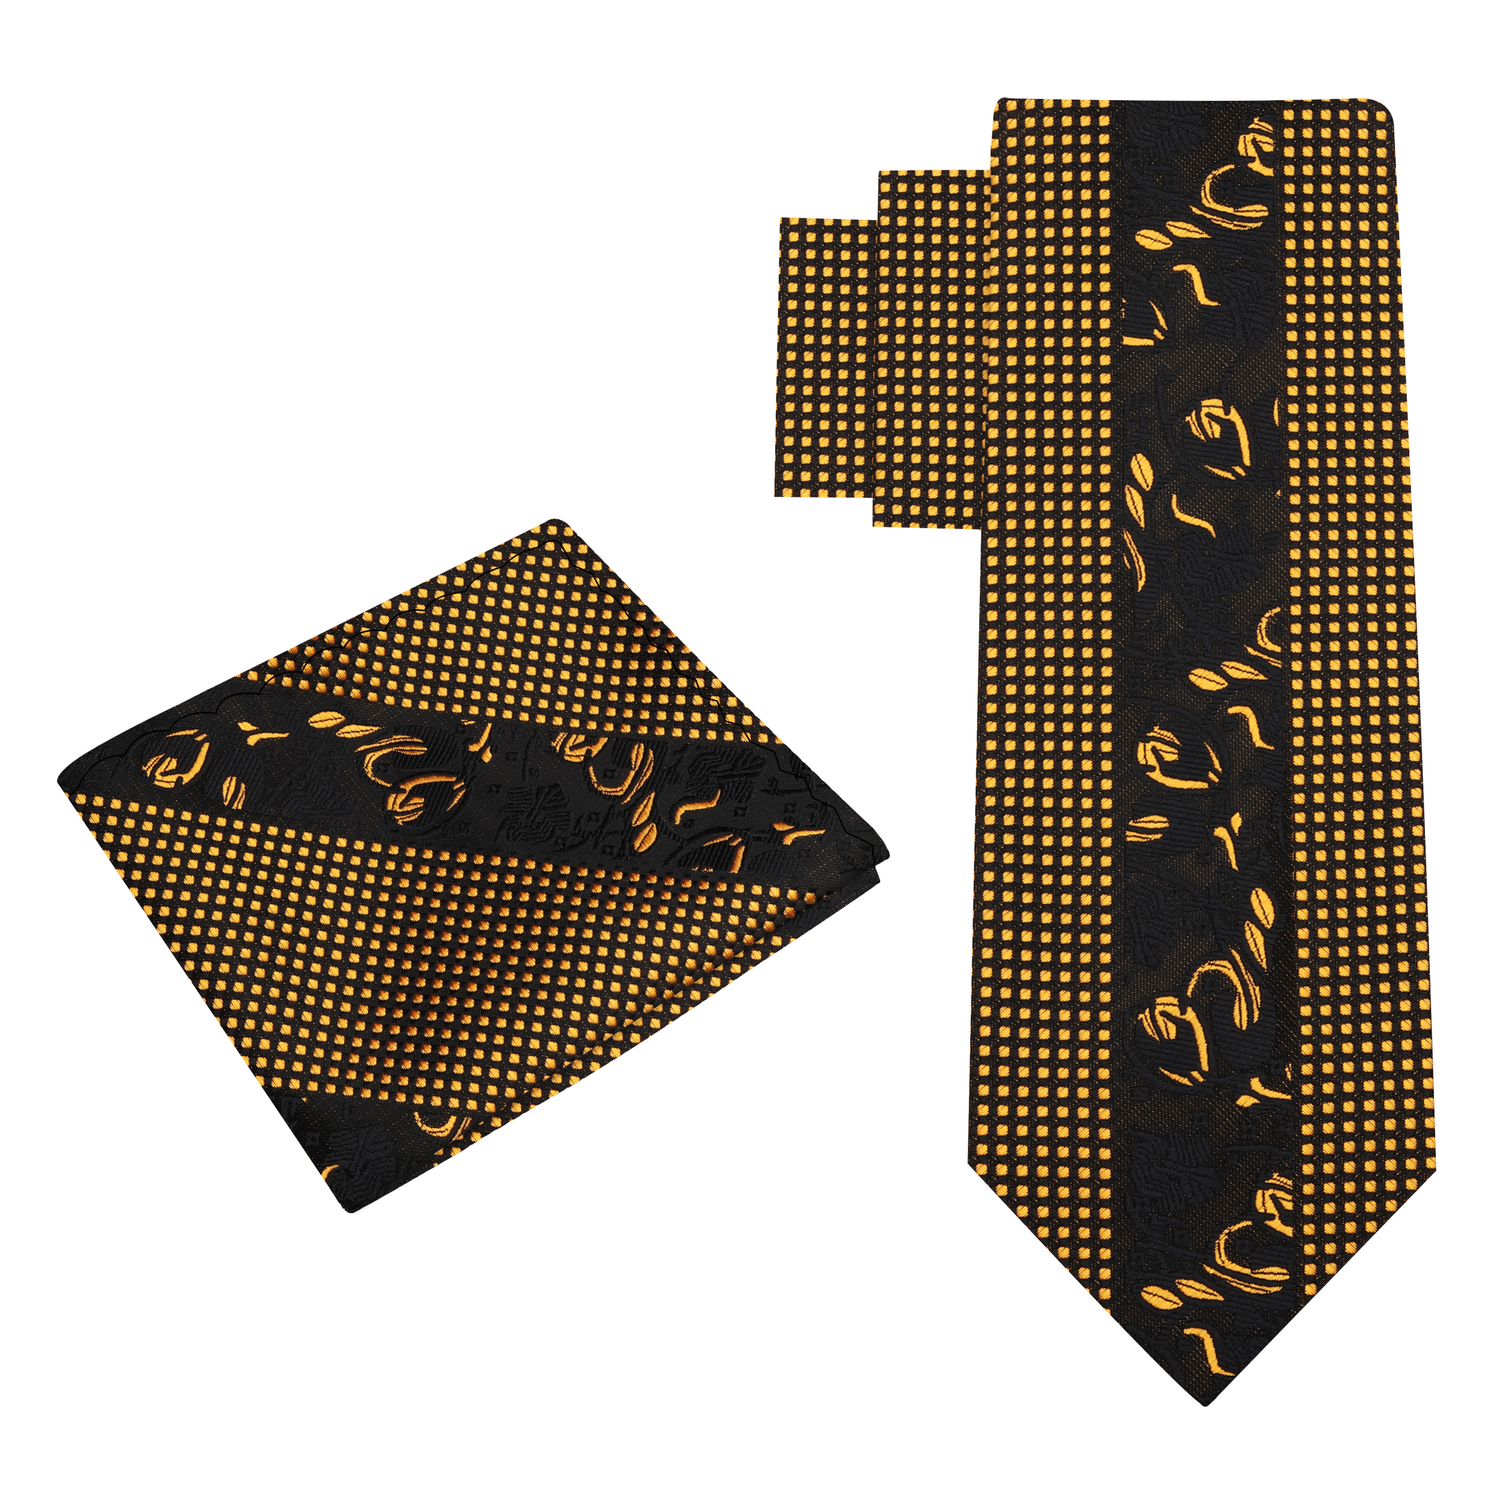 Alt View: Black & Gold Floral and Check Necktie with Matching Square